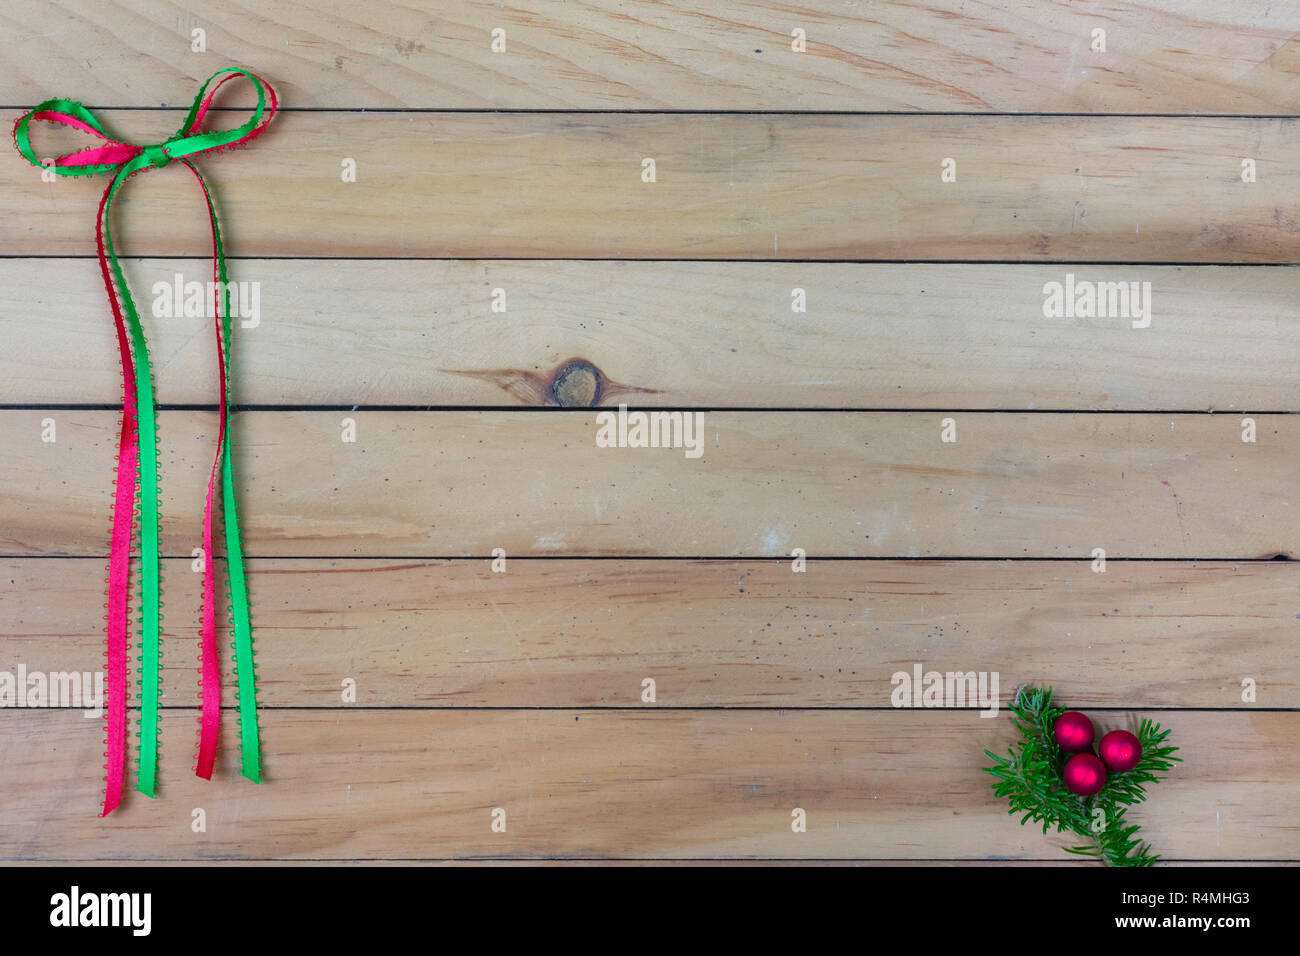 A red and green ribbon bow along the left side with a red berry cluster on balsam fir on bottom right corner on wooden slat background with copy space Stock Photo